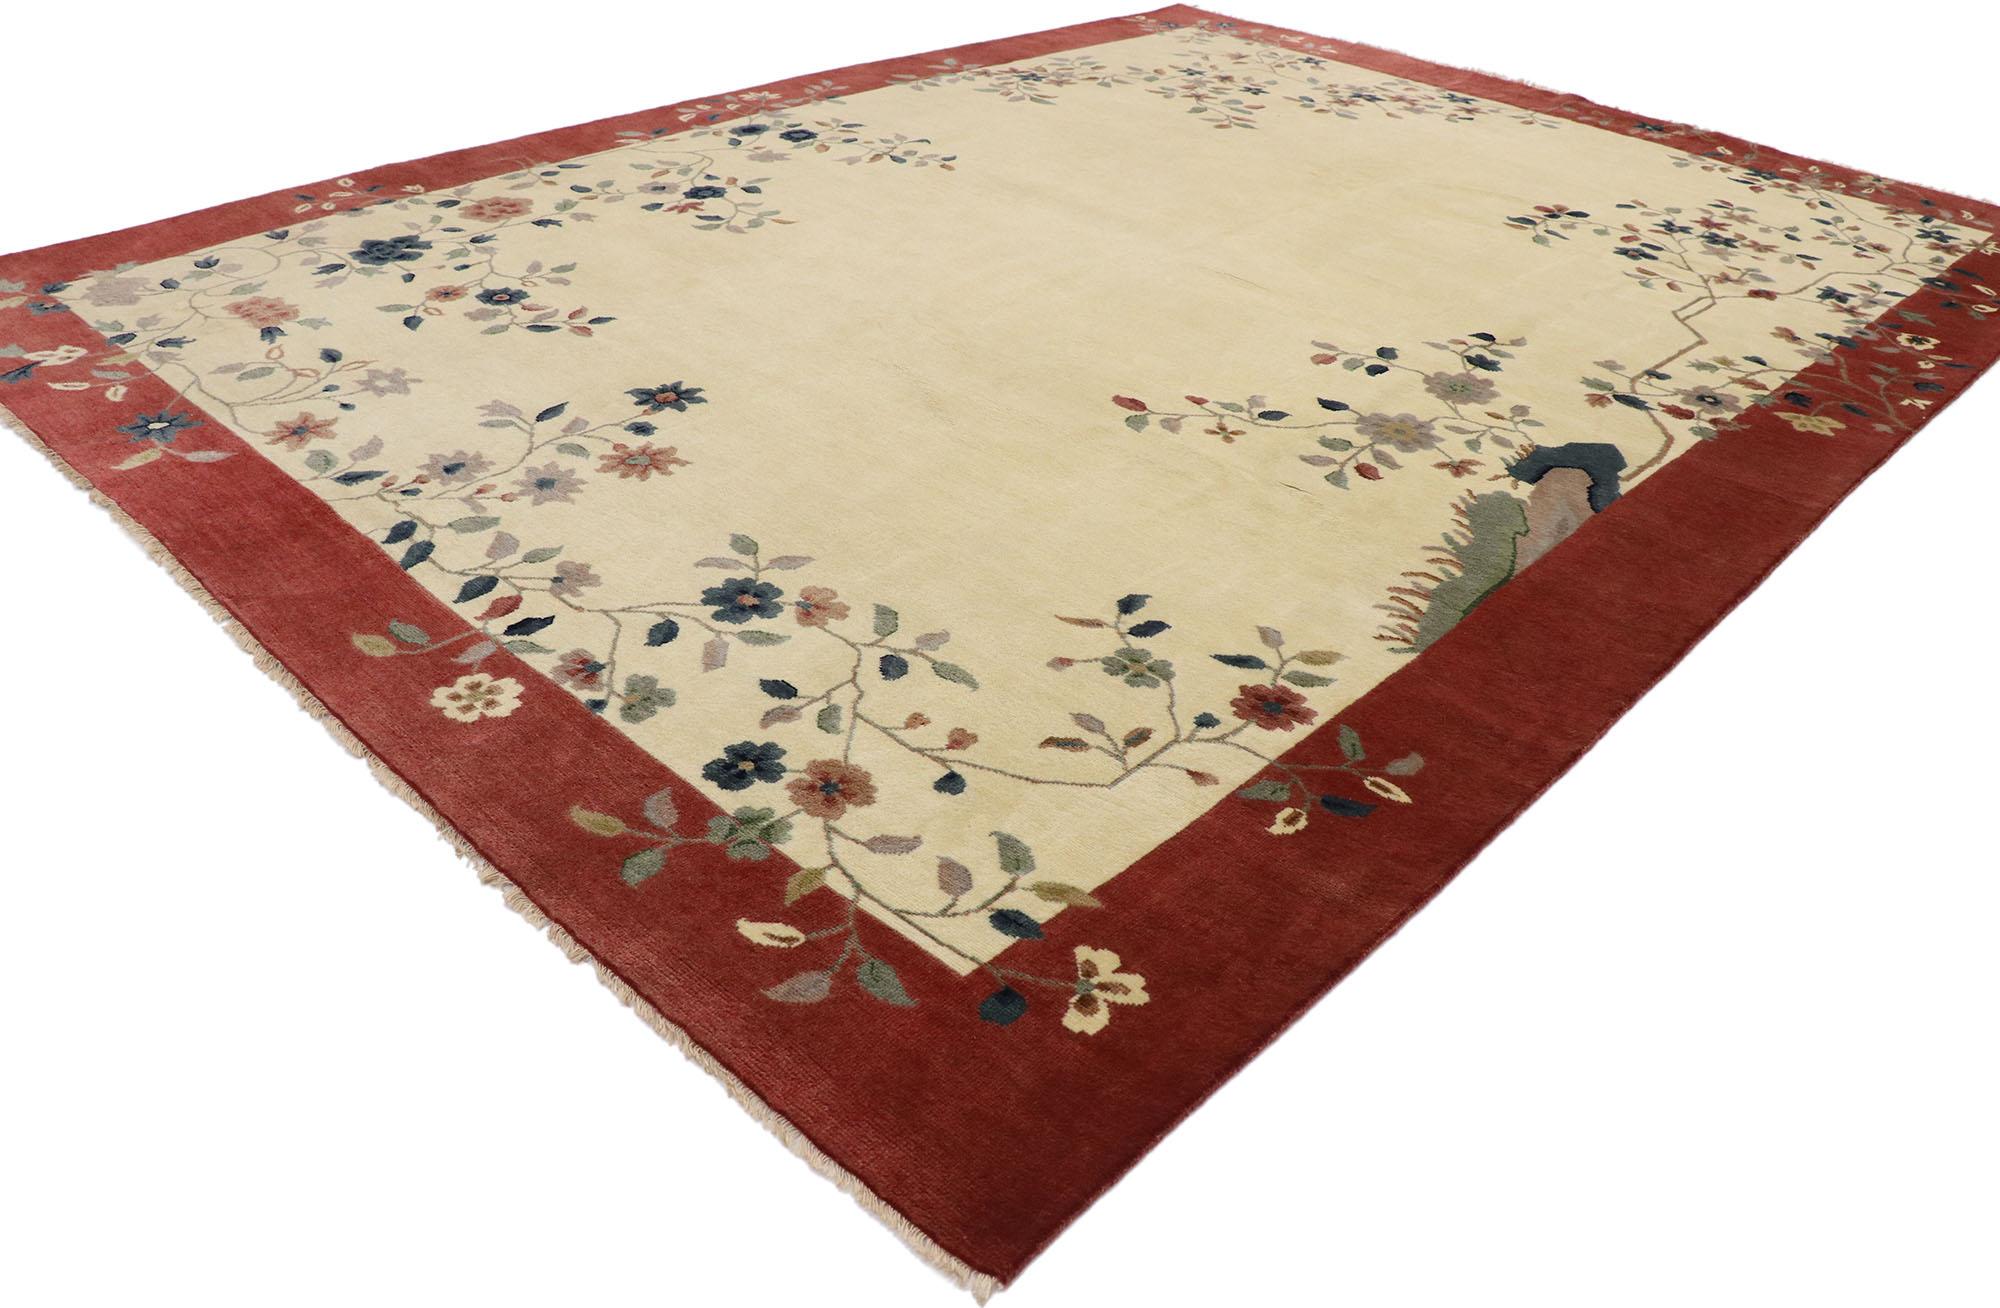 30569 New Contemporary Chinese Art Deco style rug Inspired by Walter Nichols. Channeling the famed Walter Nichols style of the 1920s and 1930s, this hand knotted wool new contemporary Chinese Art Deco rug features a lustrous vanilla field and brick